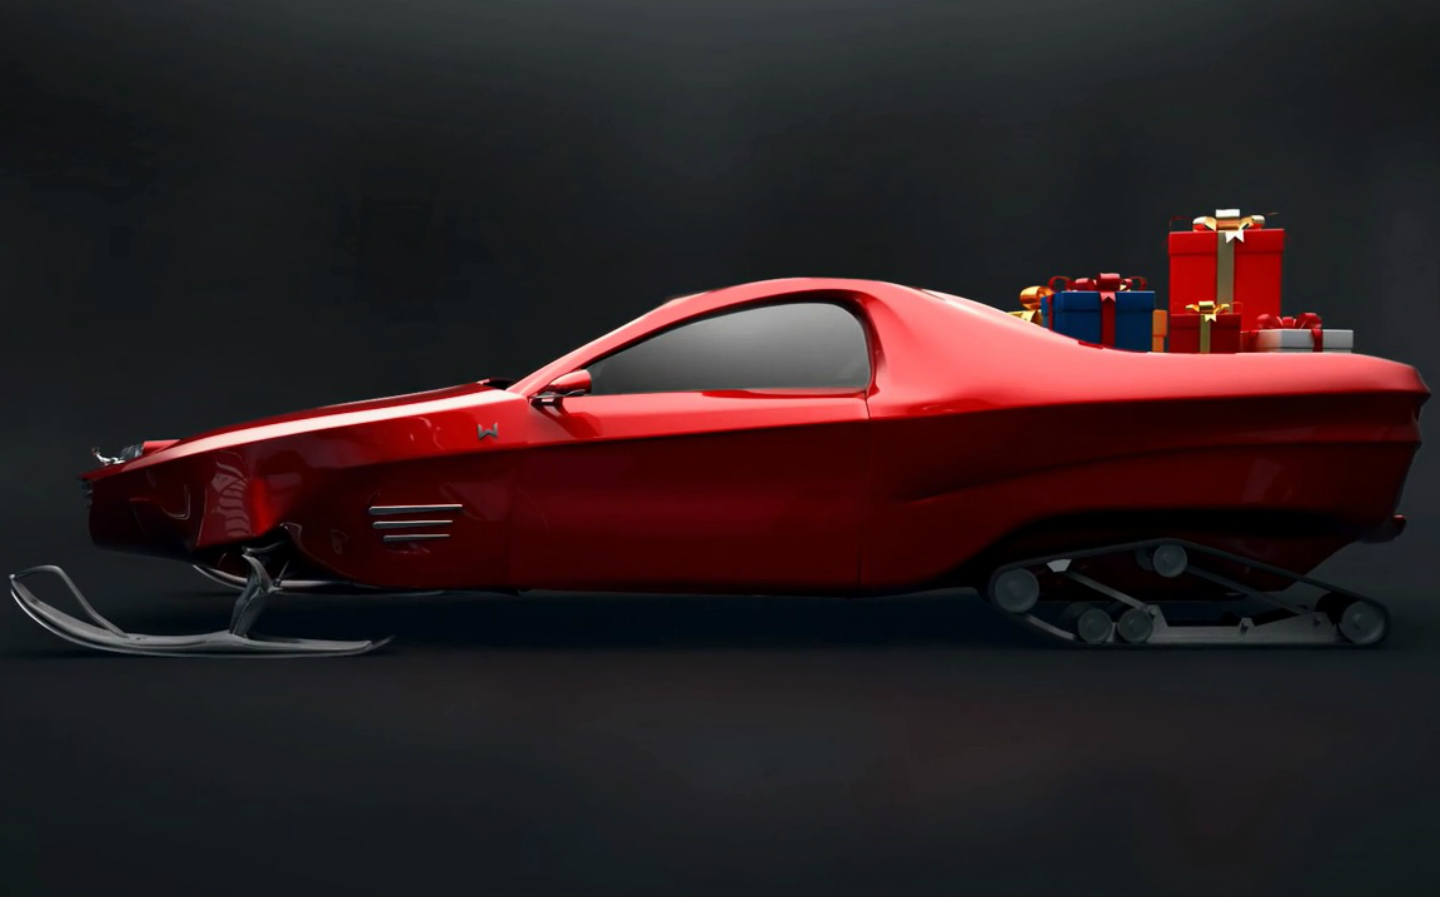 Top 5: Father Christmas sleighs designed by car makers